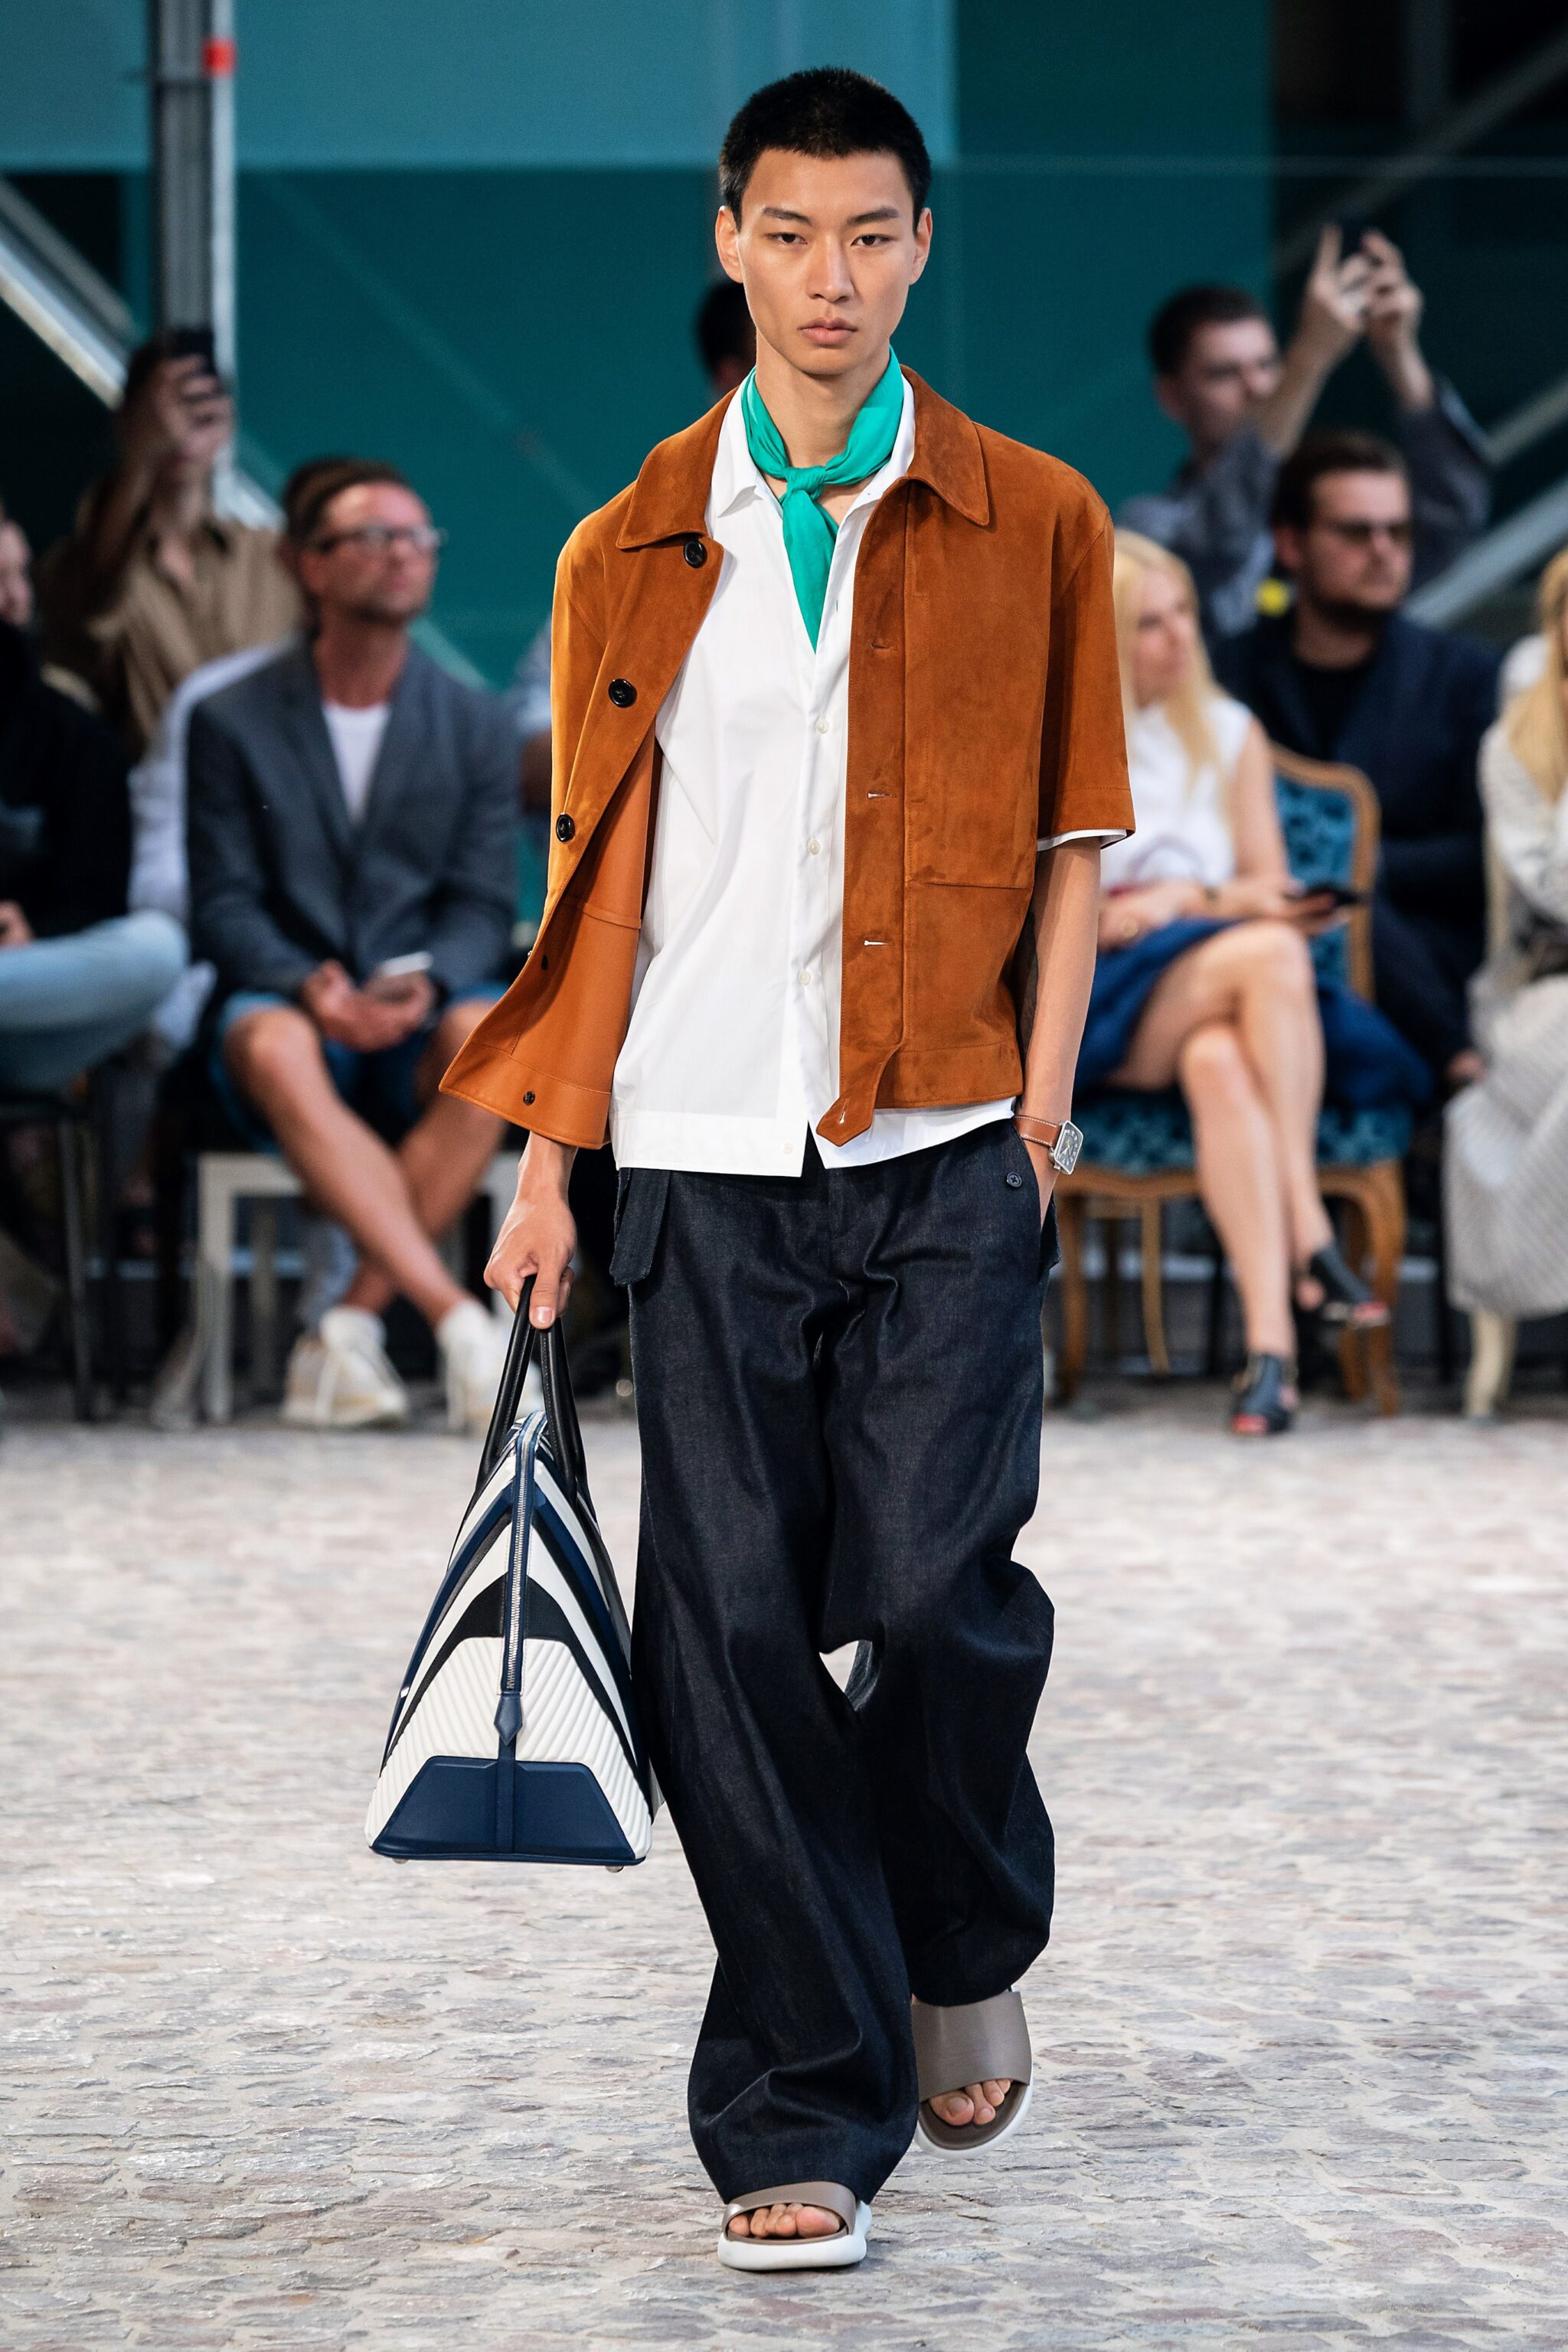 Vogue - The Louis Vuitton Spring 2020 menswear collection is here